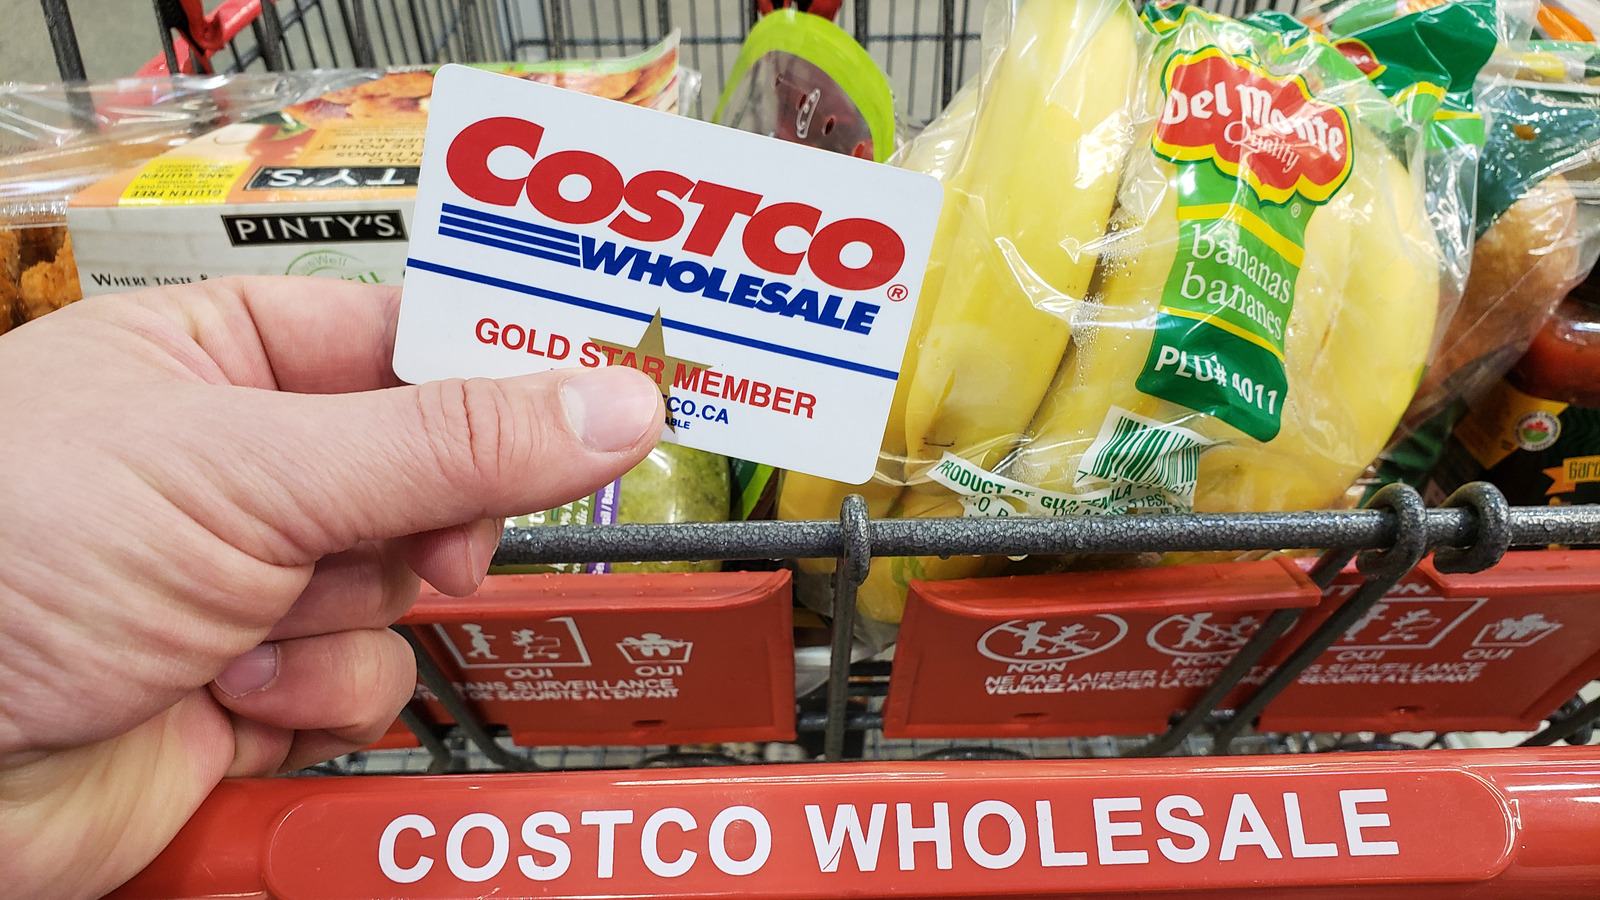 https://www.thedailymeal.com/img/gallery/what-you-need-to-know-about-costcos-go-back-cart/l-intro-1670080220.jpg